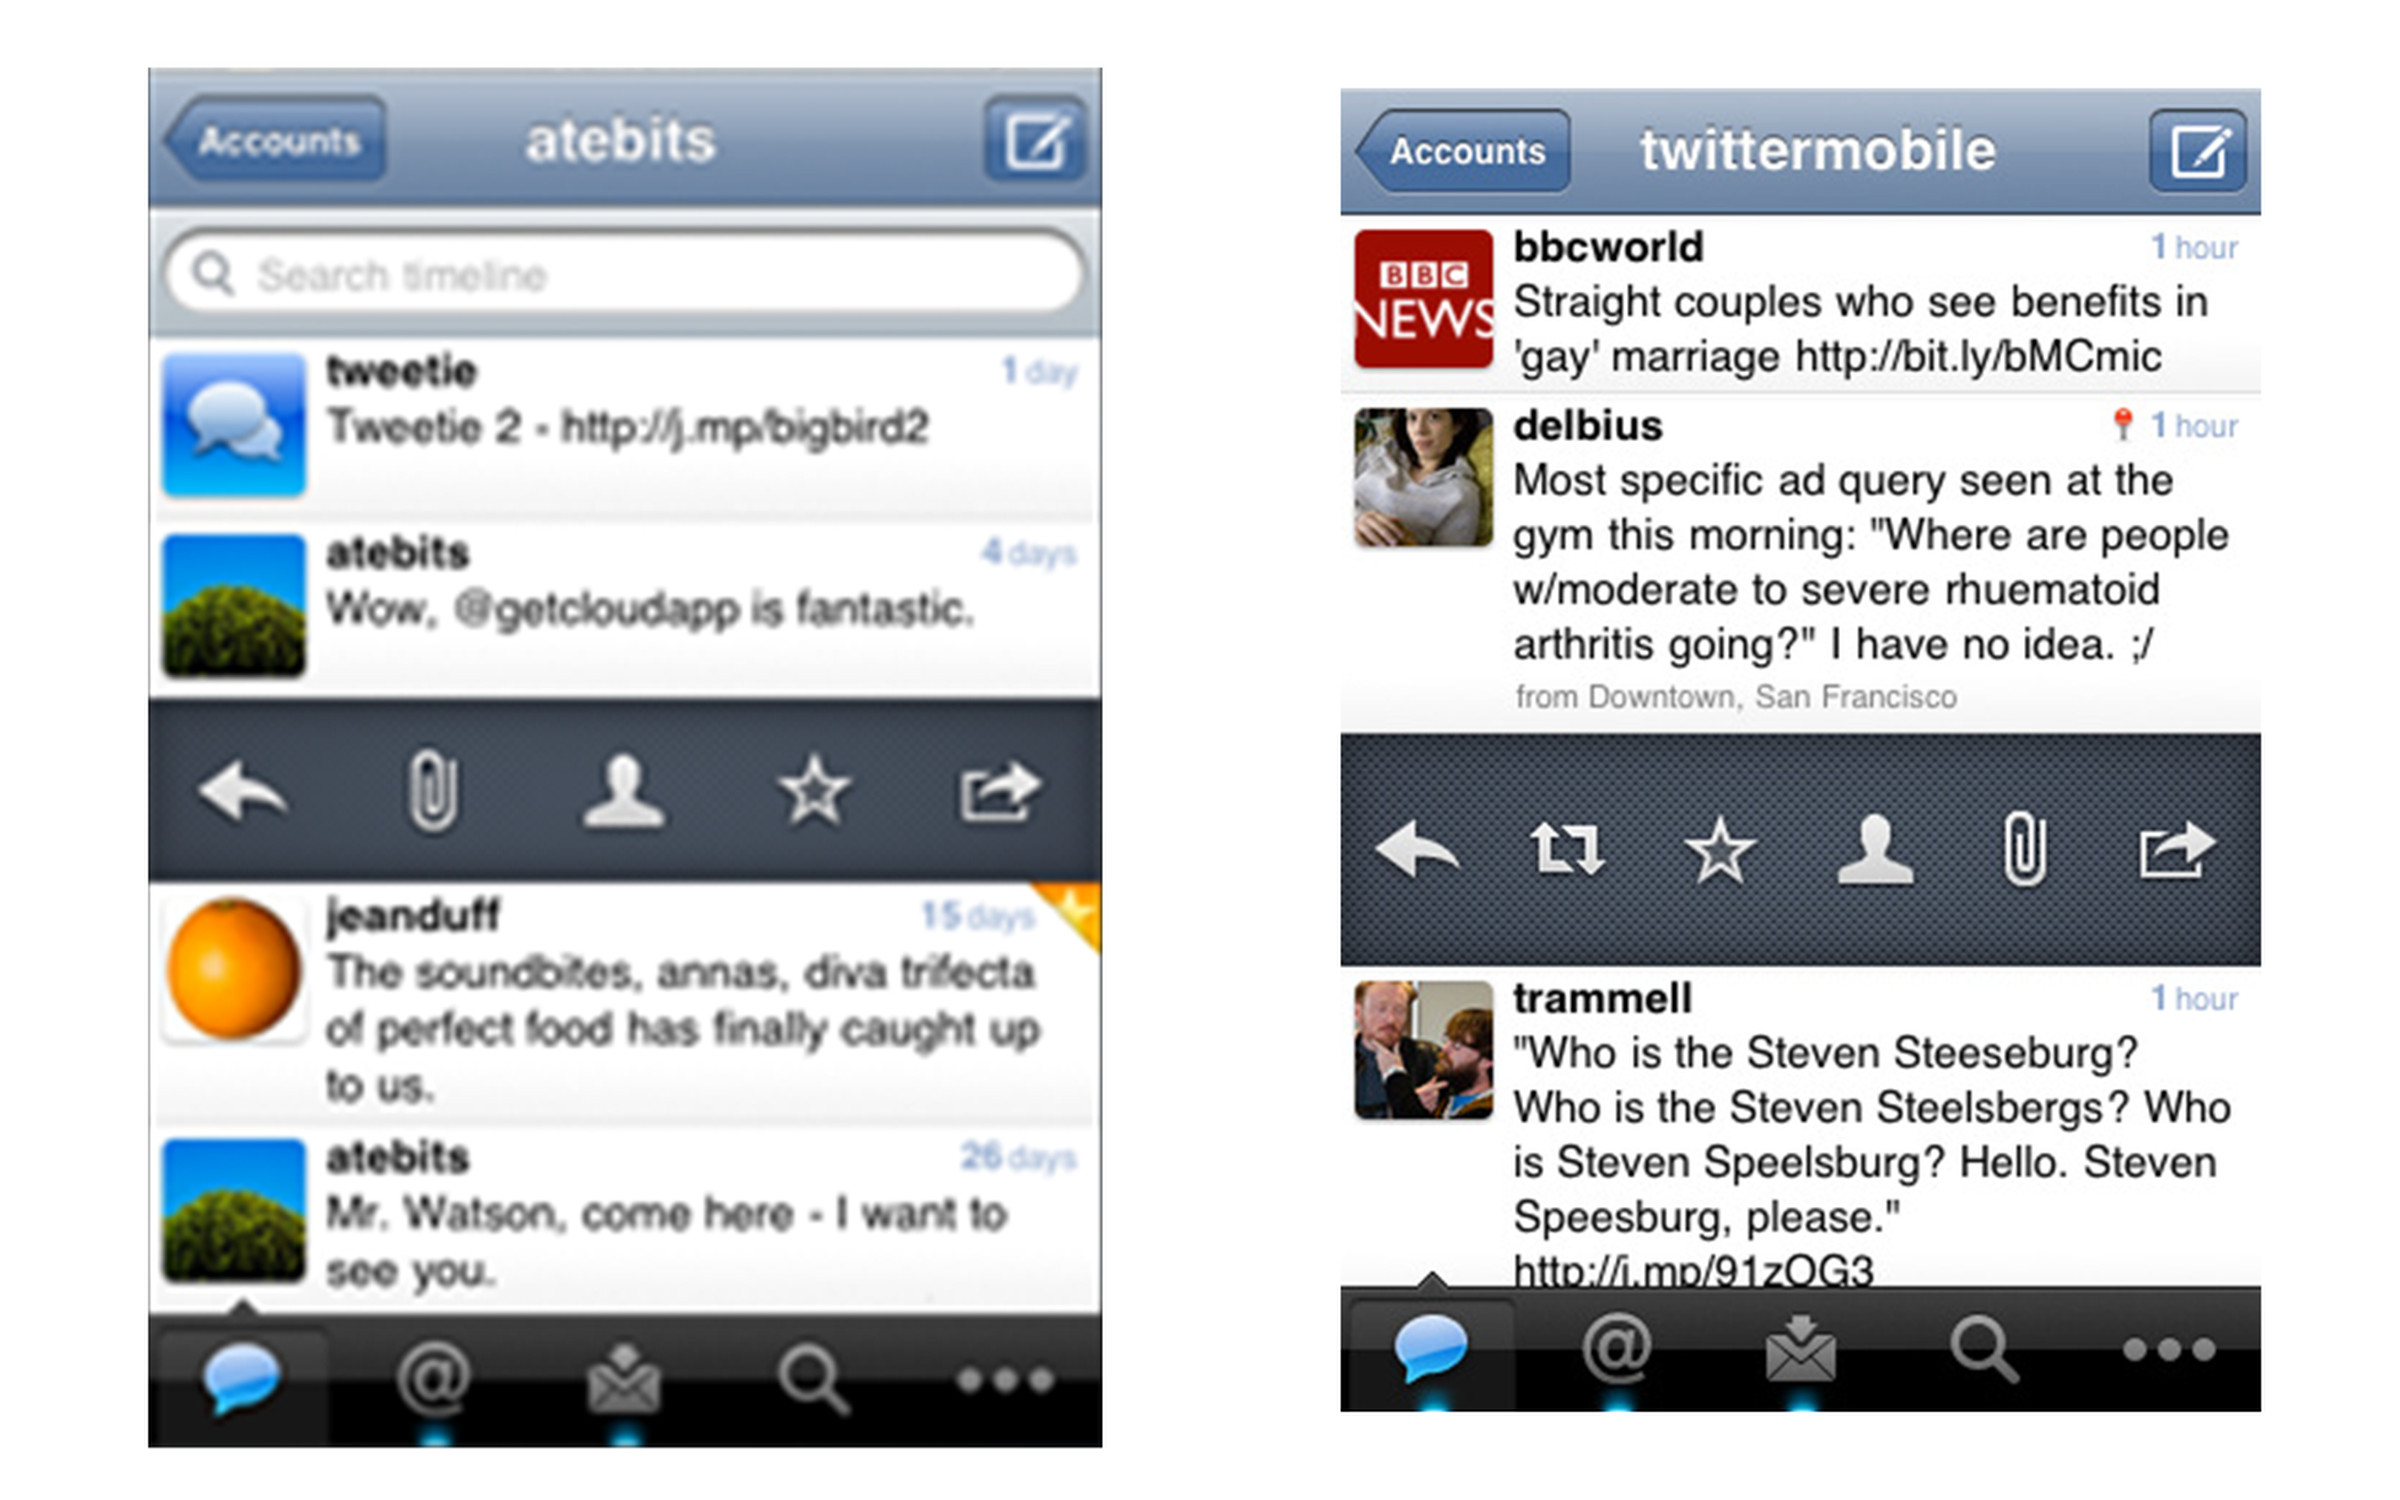 Screenshot of Tweetie 2 compared to Twitter for iPhone.